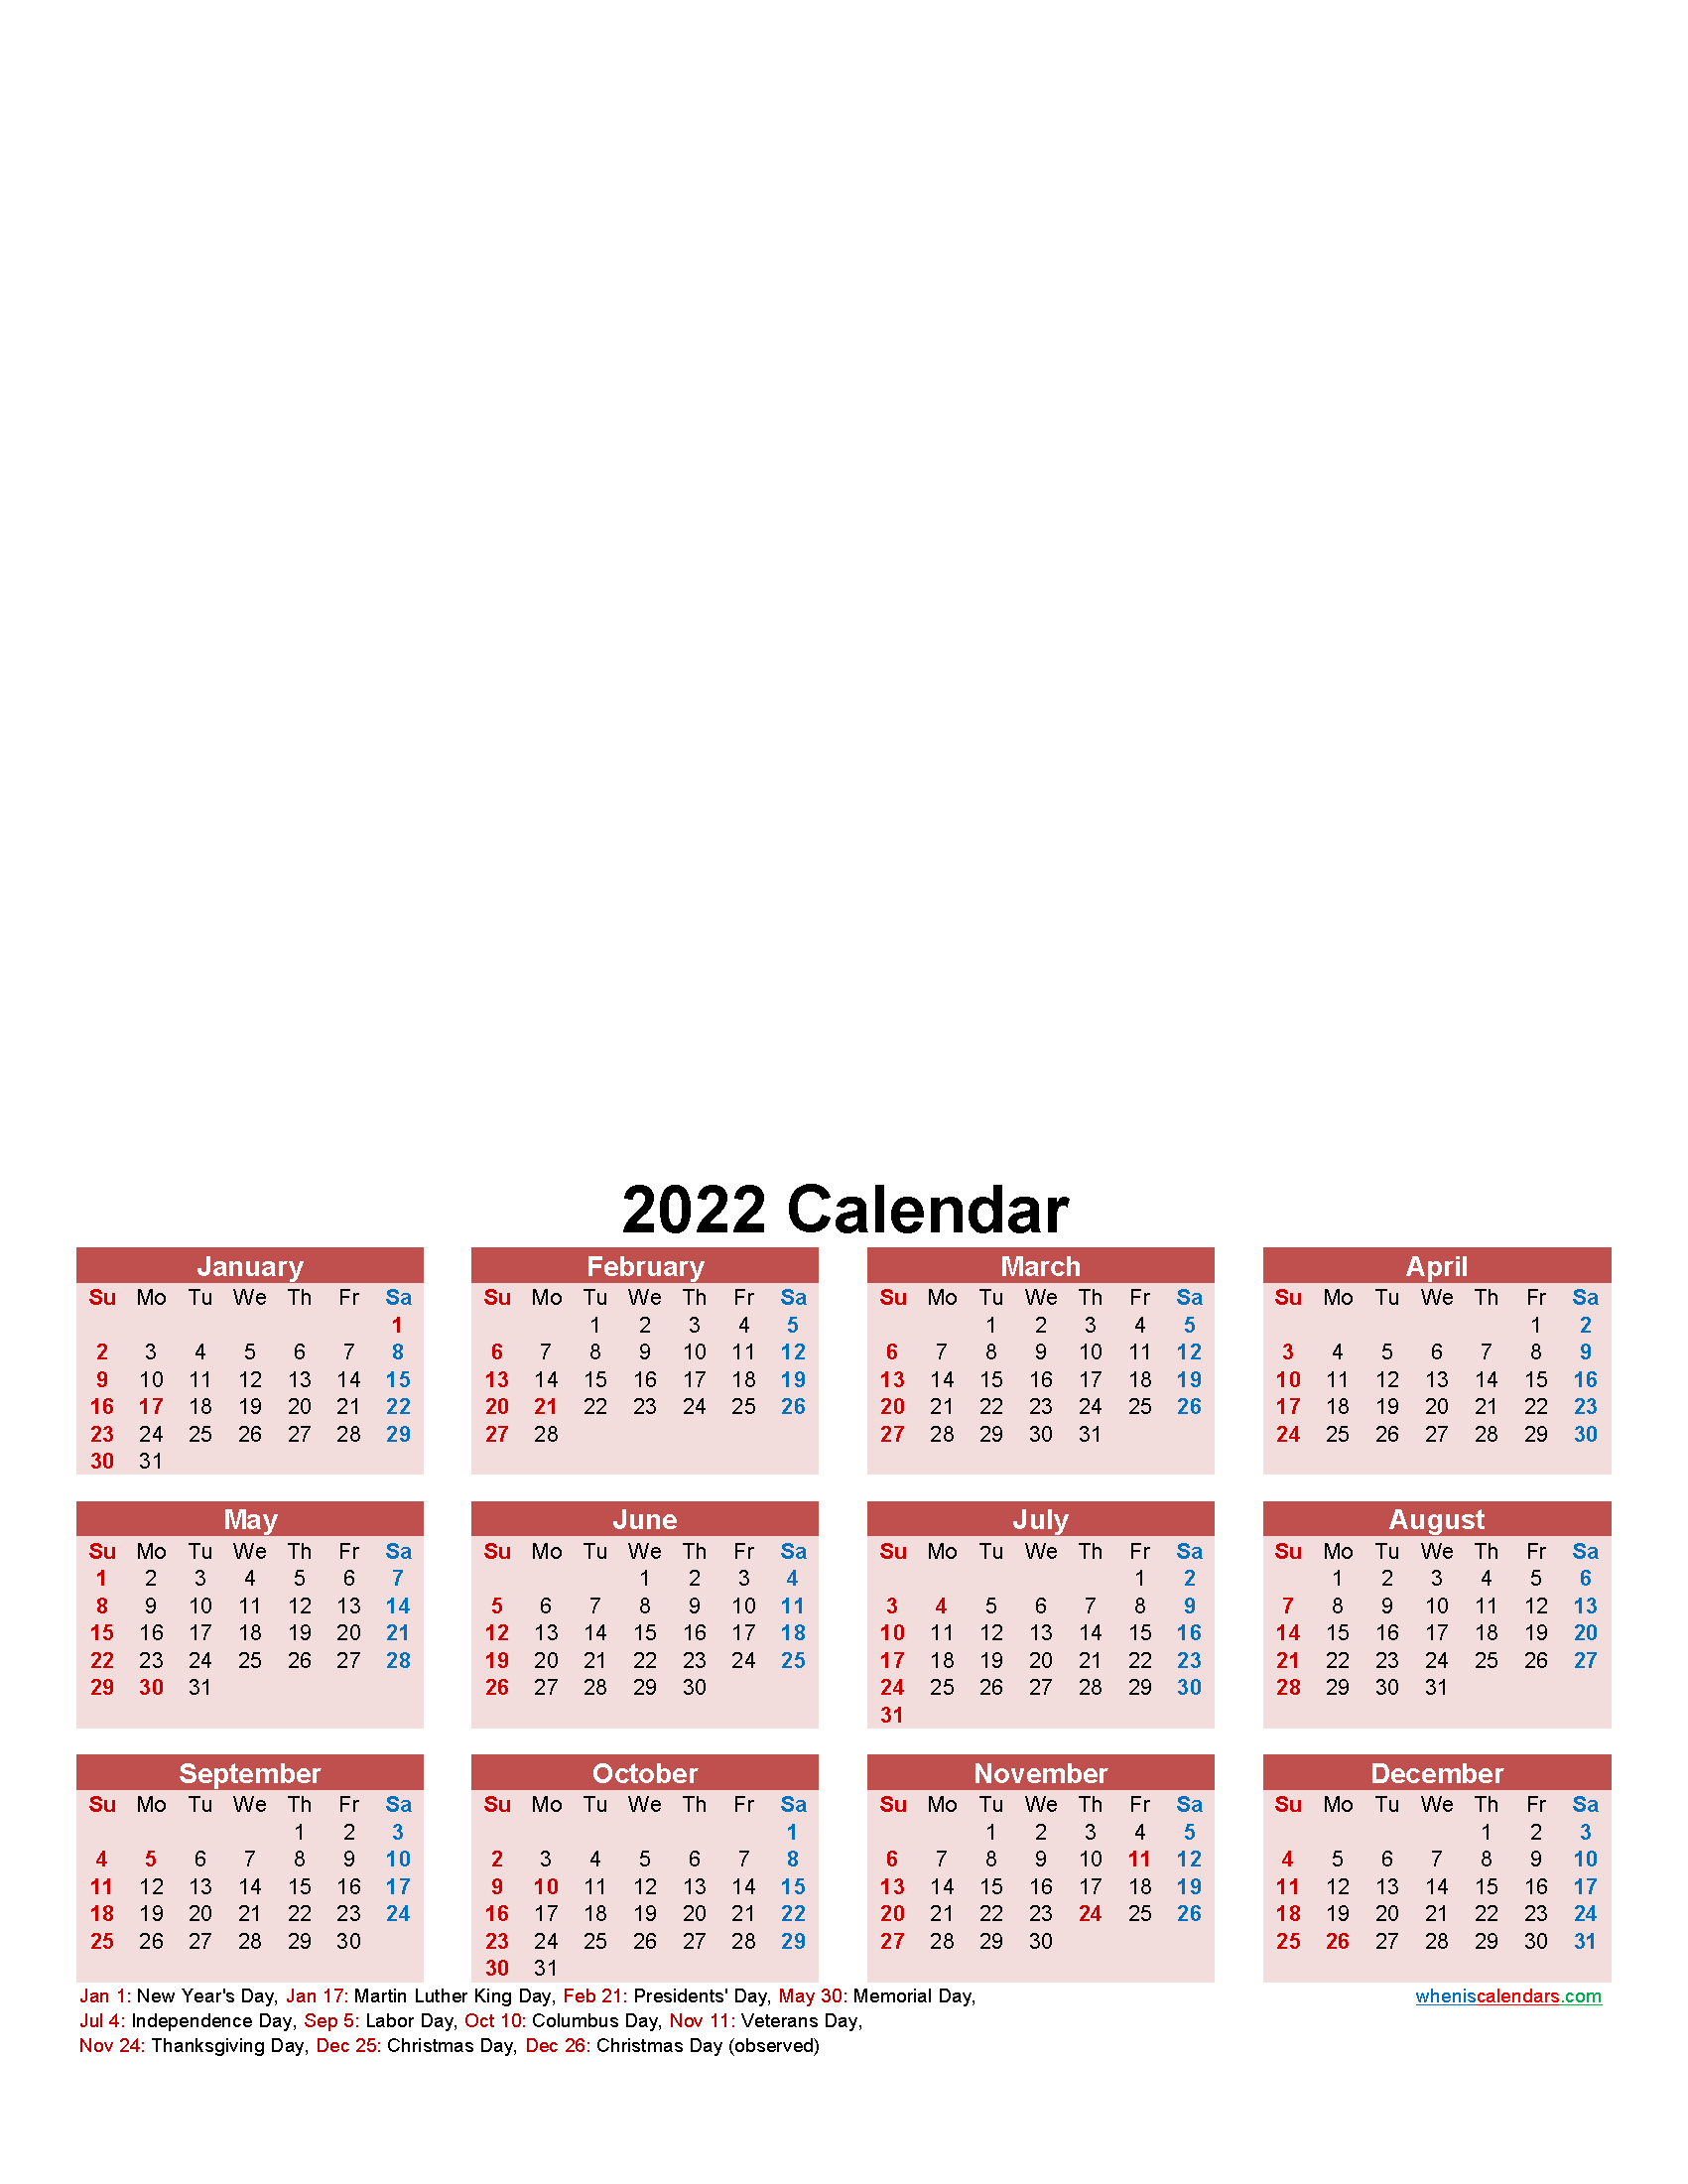 Customized Calendar 2022 Free.Make Your Own Calendar Free 2022 Template No F22y10